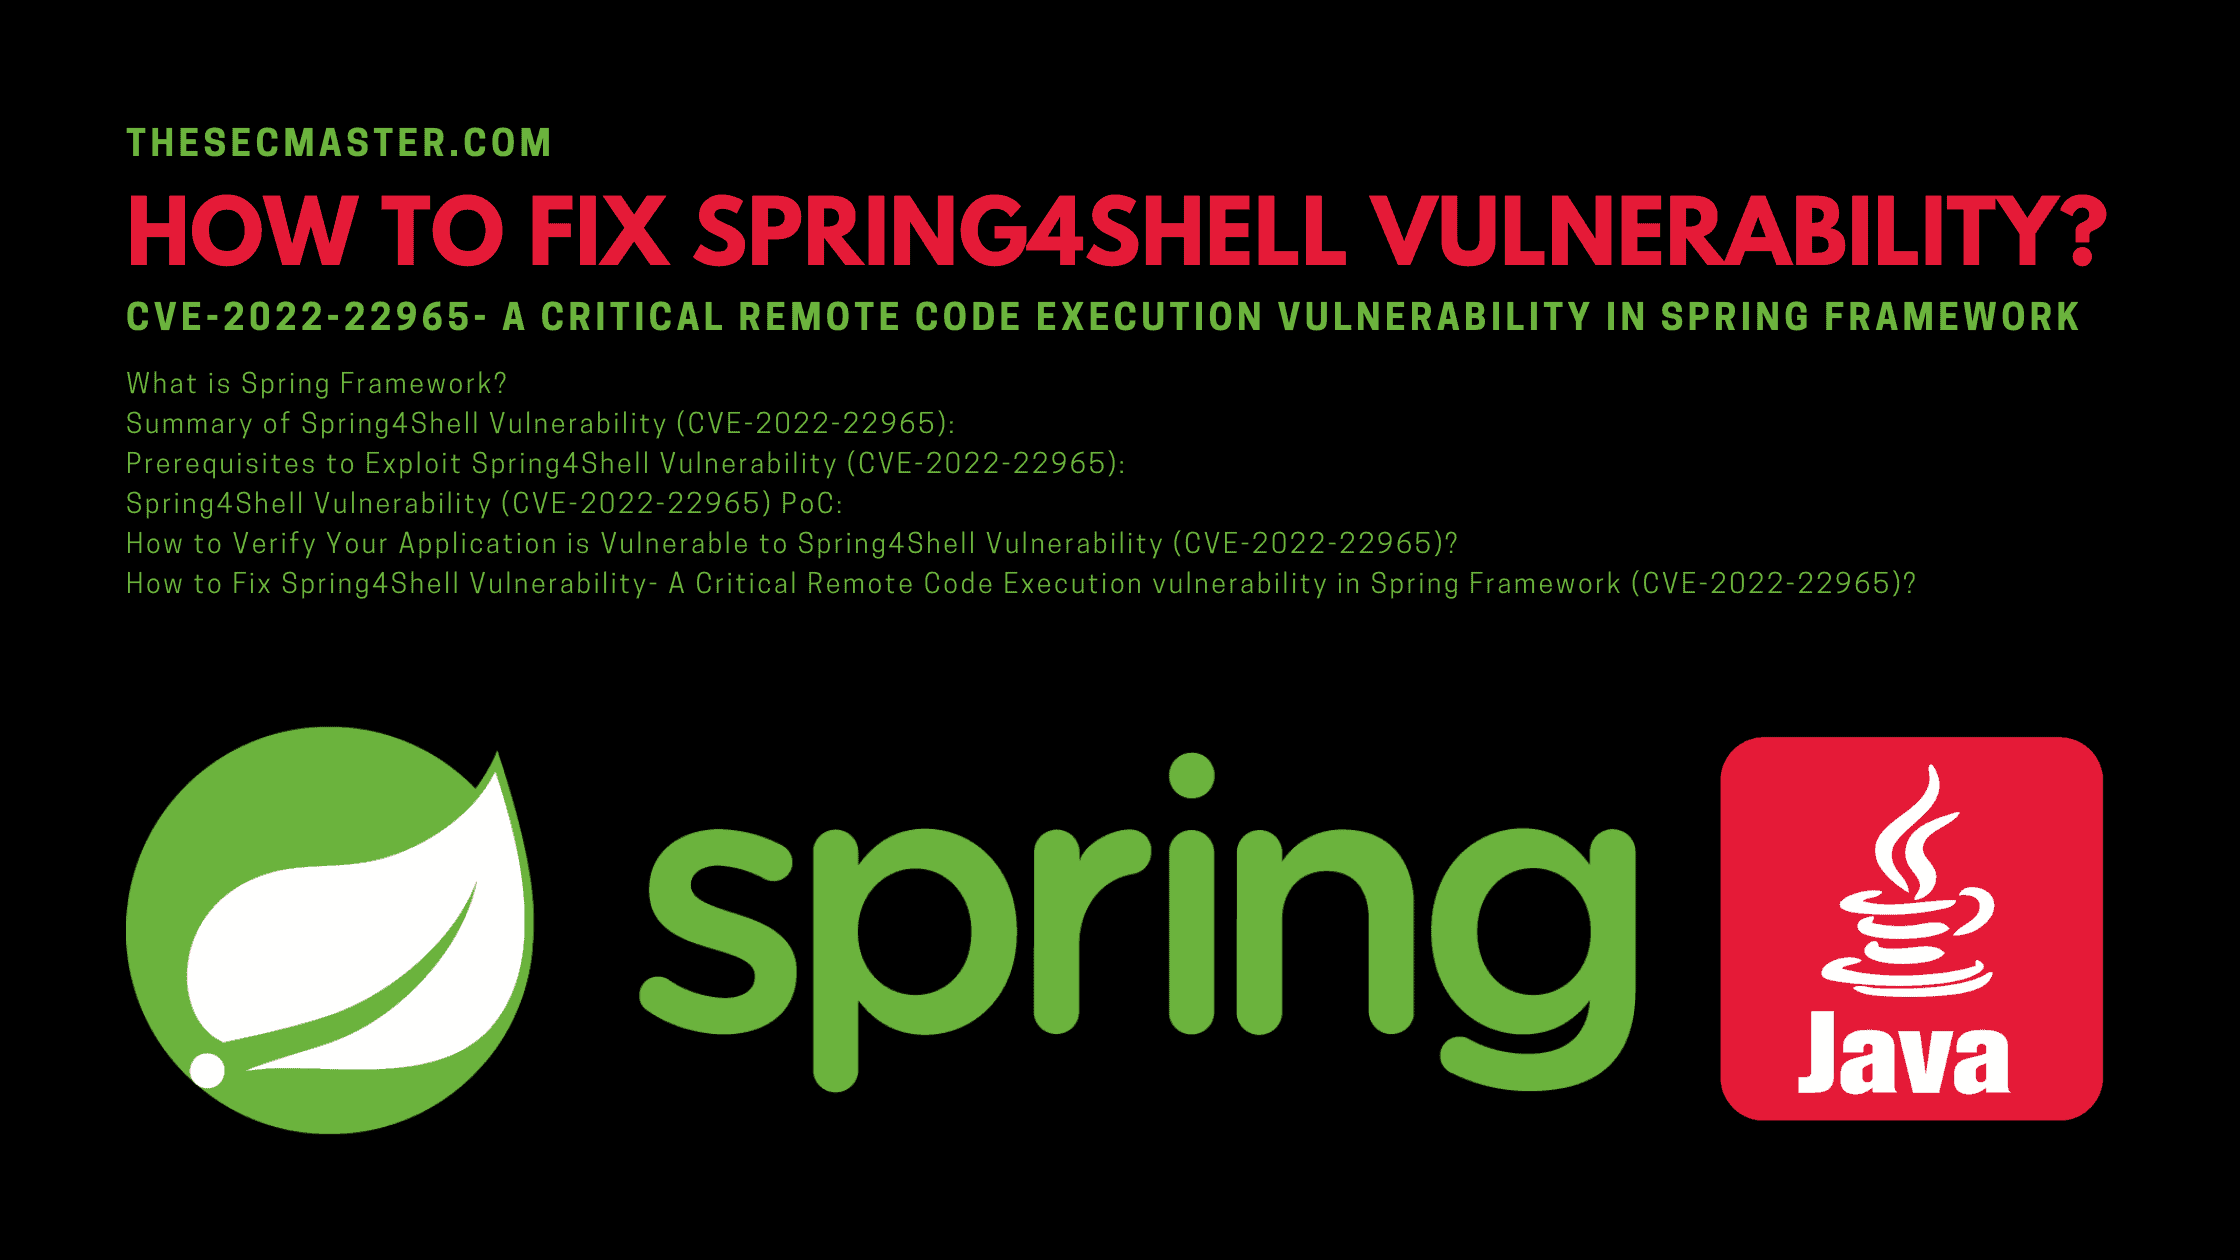 How To Fix Spring4shell Vulnerability A Critical Remote Code Execution Vulnerability In Spring Framework Cve 2022 229654